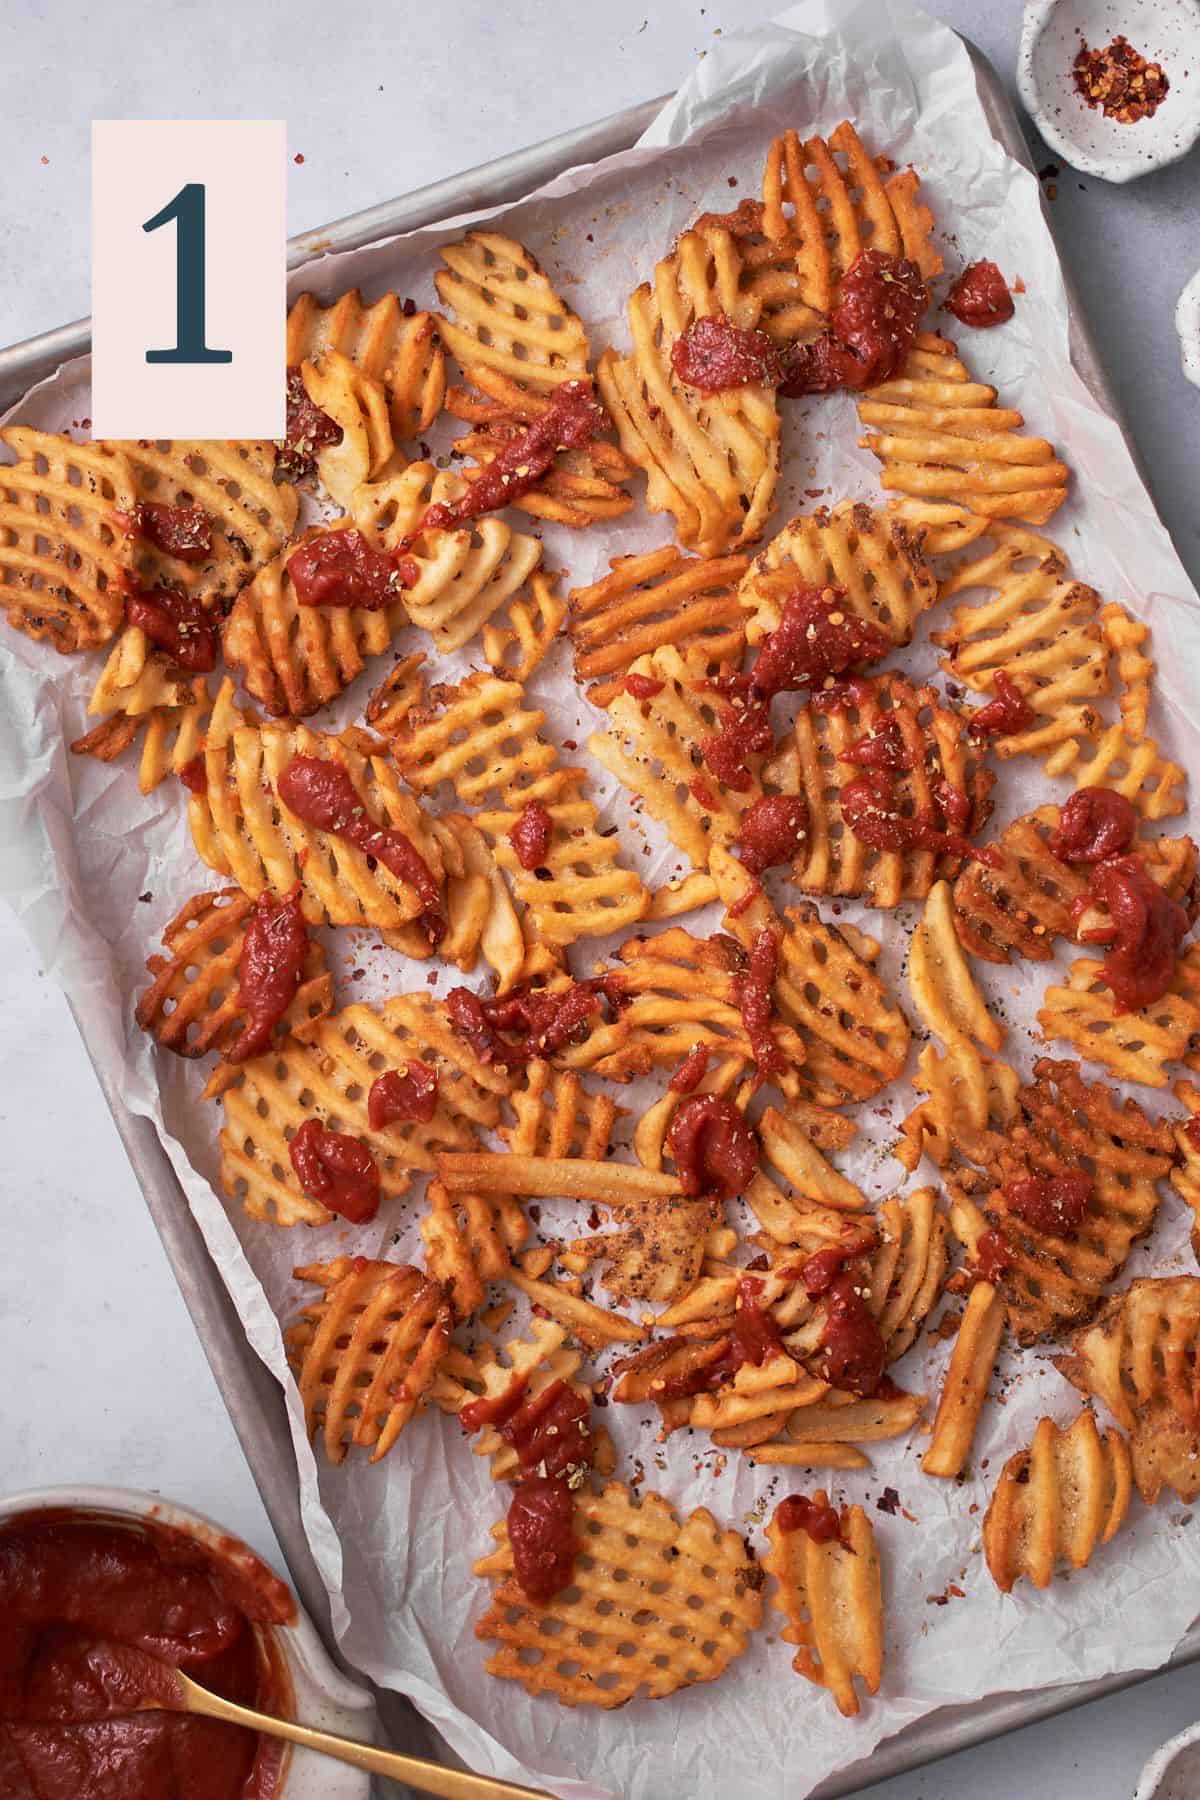 Waffle fries with pizza sauce, oregano, red pepper flakes, and garlic on top.